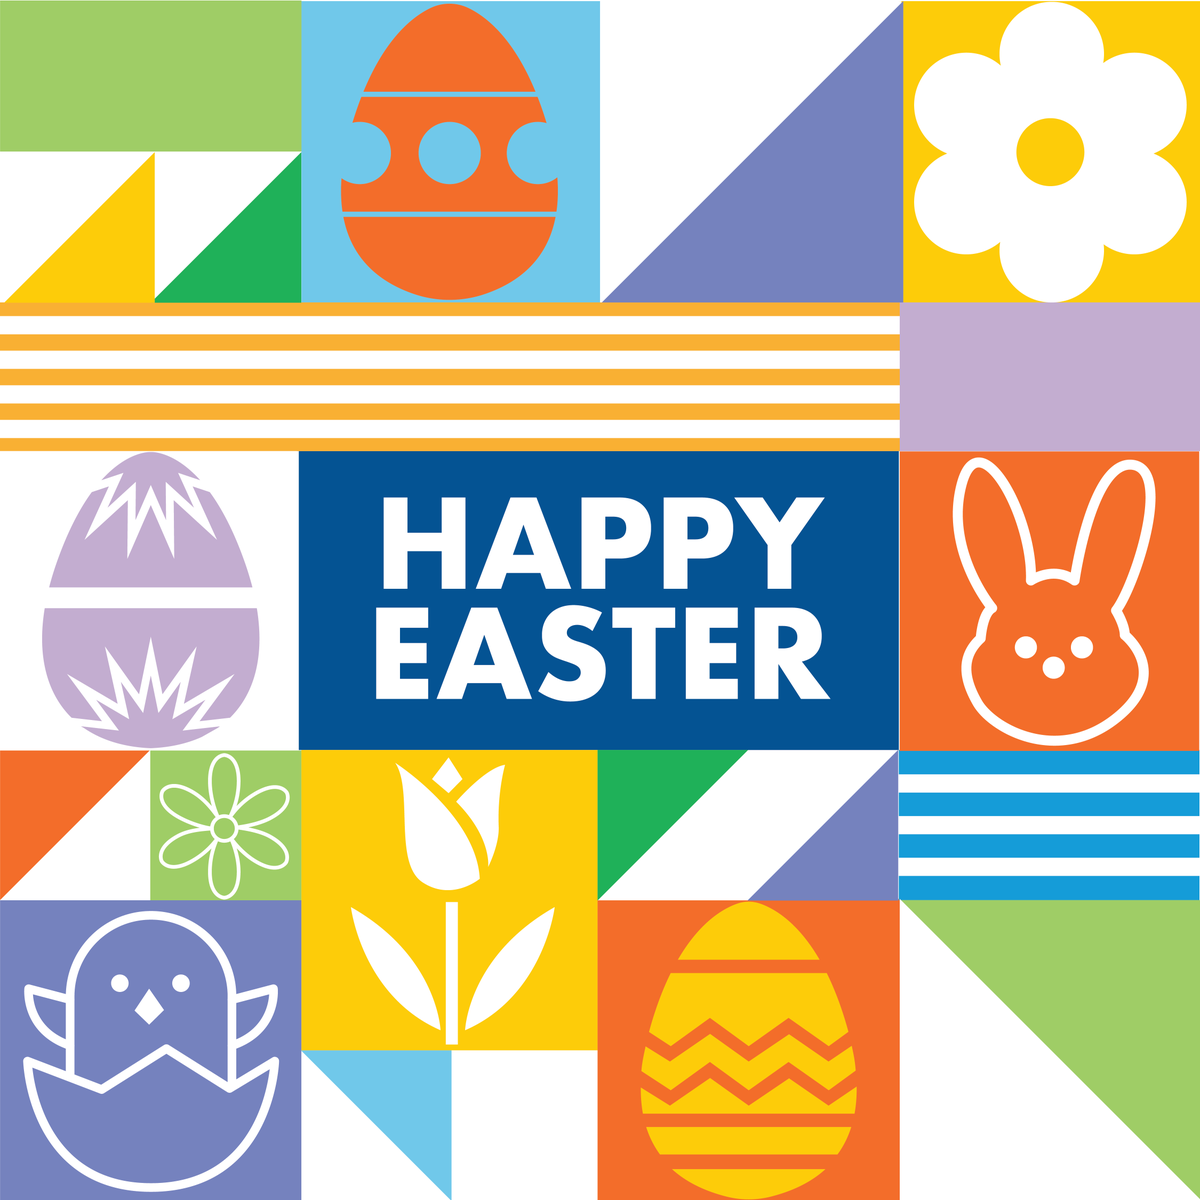 Happy Easter to all our students, faculty, and community members! Remember, no matter where you are or how you choose to observe this day, you're a valued part of our diverse and vibrant community. Happy Easter!